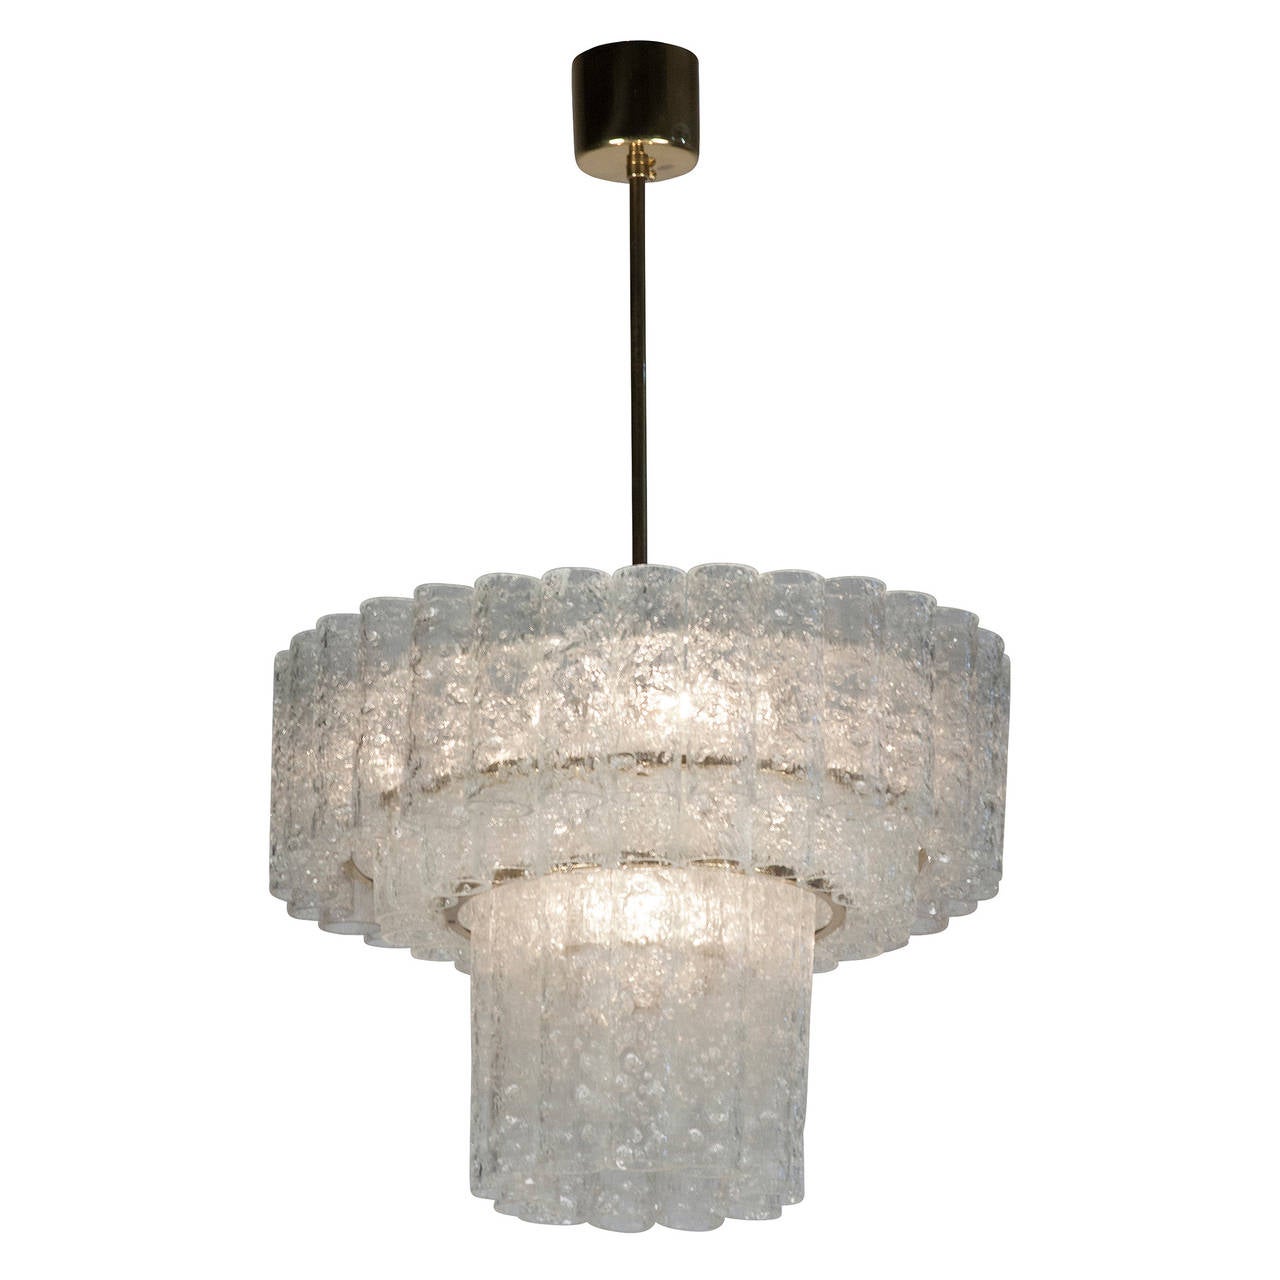 Three tier textured glass chandelier, three rings of glass cylinders suspended from a brass fixture, by Doria, Germany 1960s. Overall height 30 in, height of fixture 14 in, diameter 18 in. (Item #2042)